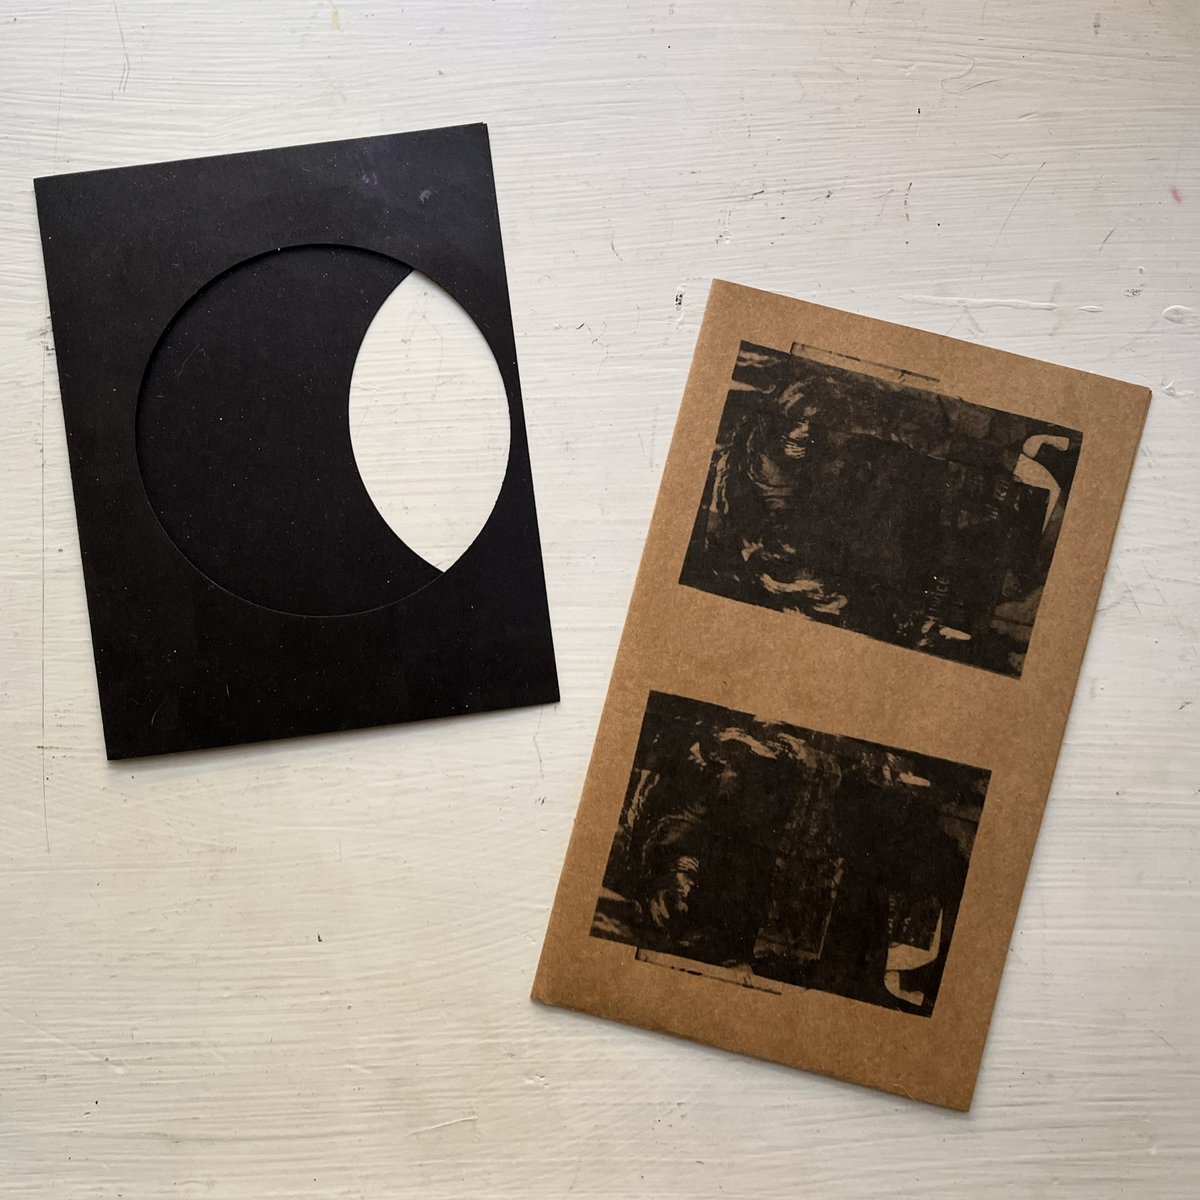 april 2024's zine, « APPARENT DIAMETER », is a fold-out poster zine printed on brown kraft paper, housed in a black cardstock sleeve that 'eclipses' itself. the poster measures 8.5x14 inches when unfolded. the components are somewhat ephemeral, without any binding.